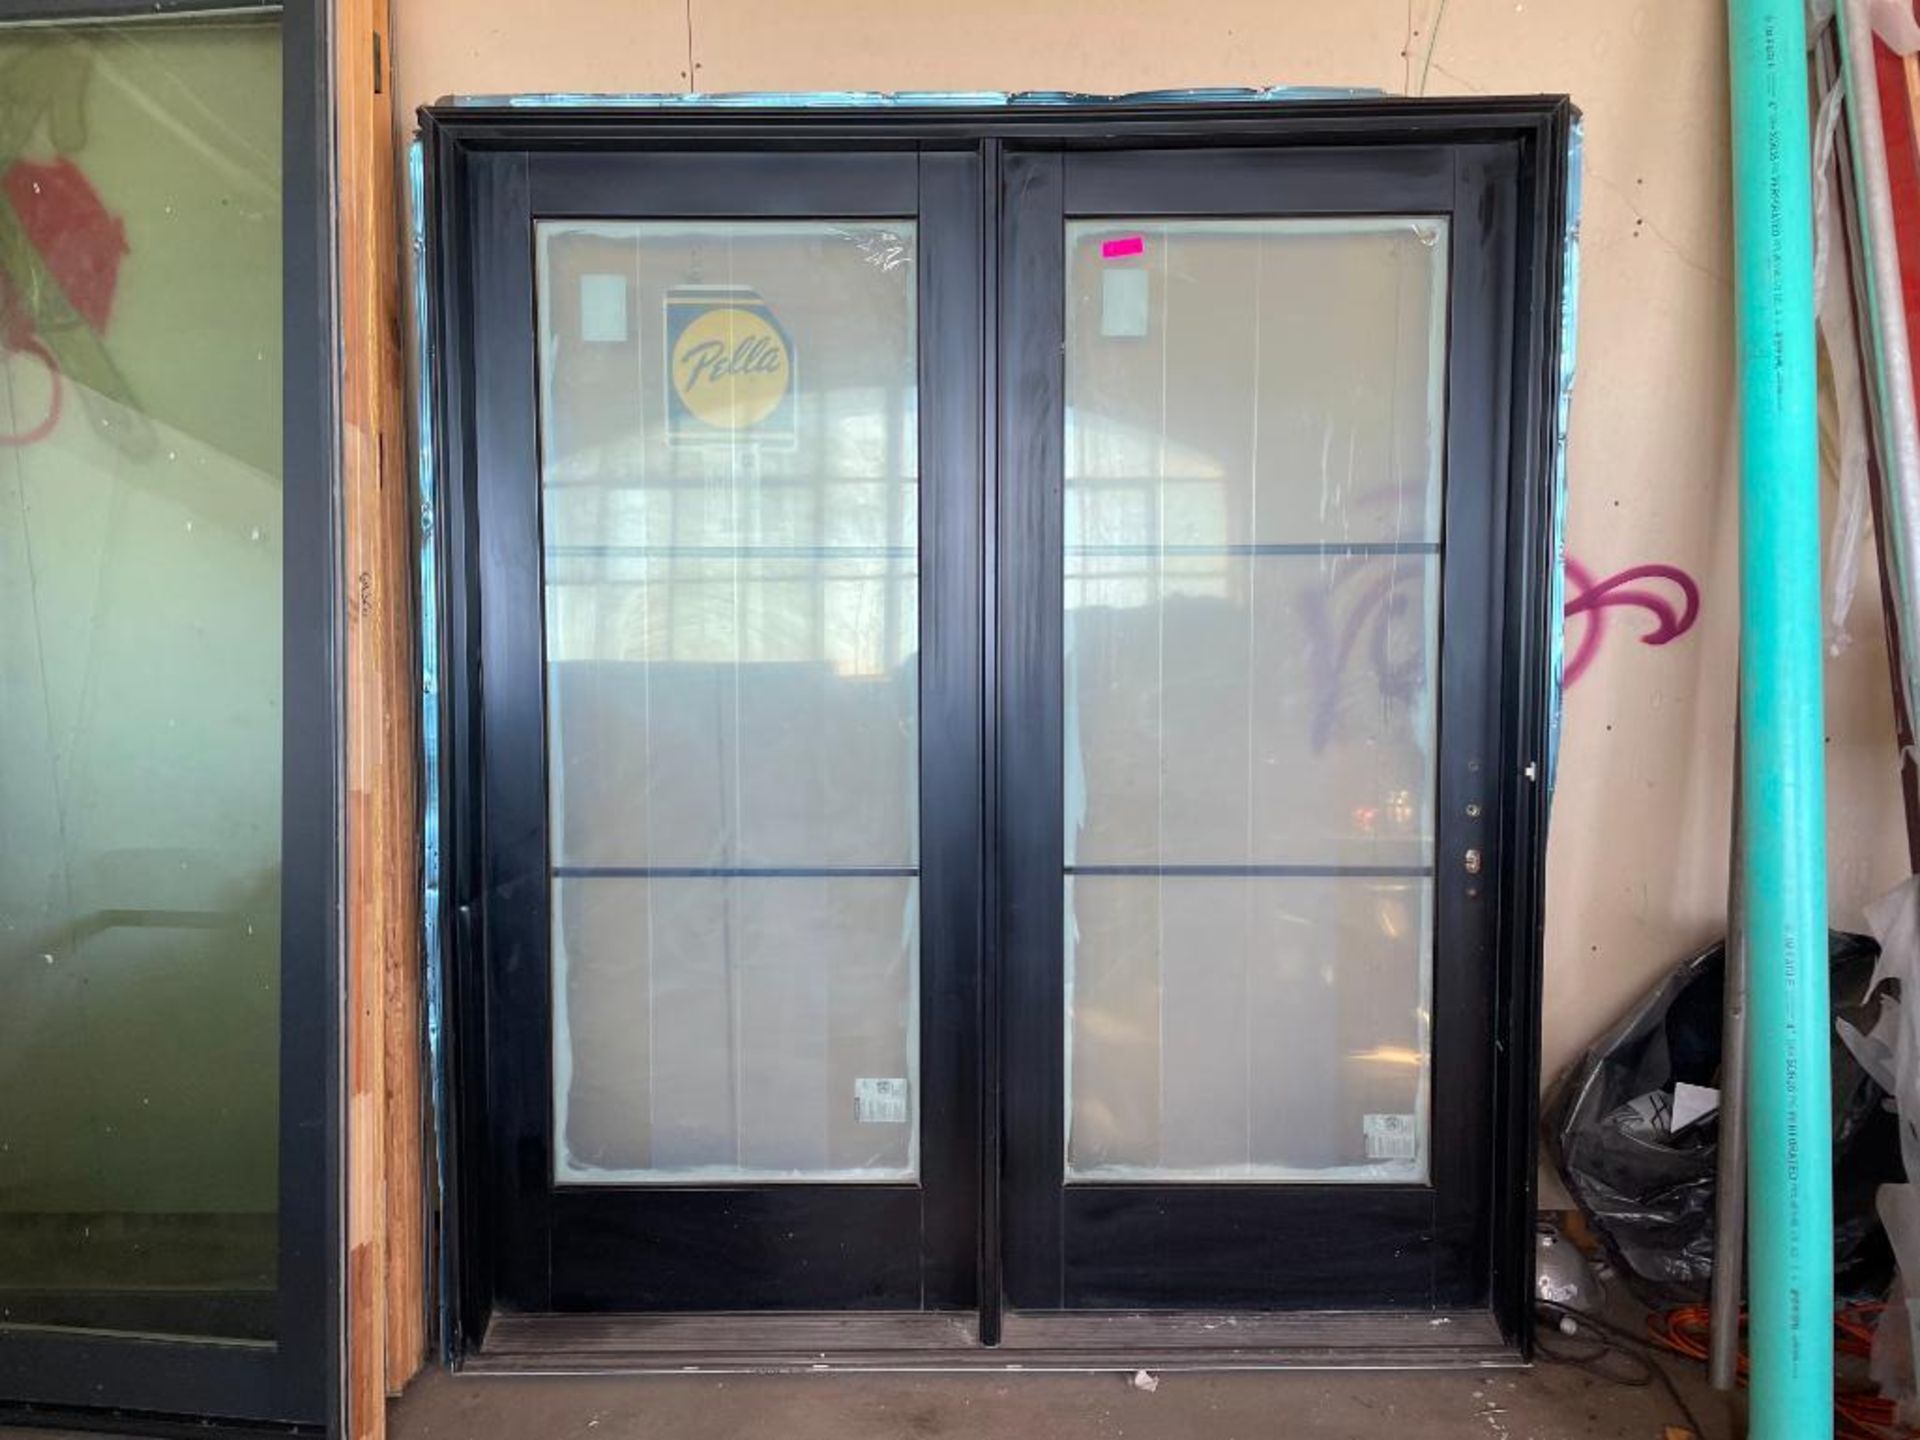 72" X 96" COMMERCIAL GLASS DOOR W/ FRAME BRAND/MODEL: PELLA SIZE: 72" X 96" LOCATION ROOM 1 QTY: 1 - Image 2 of 8